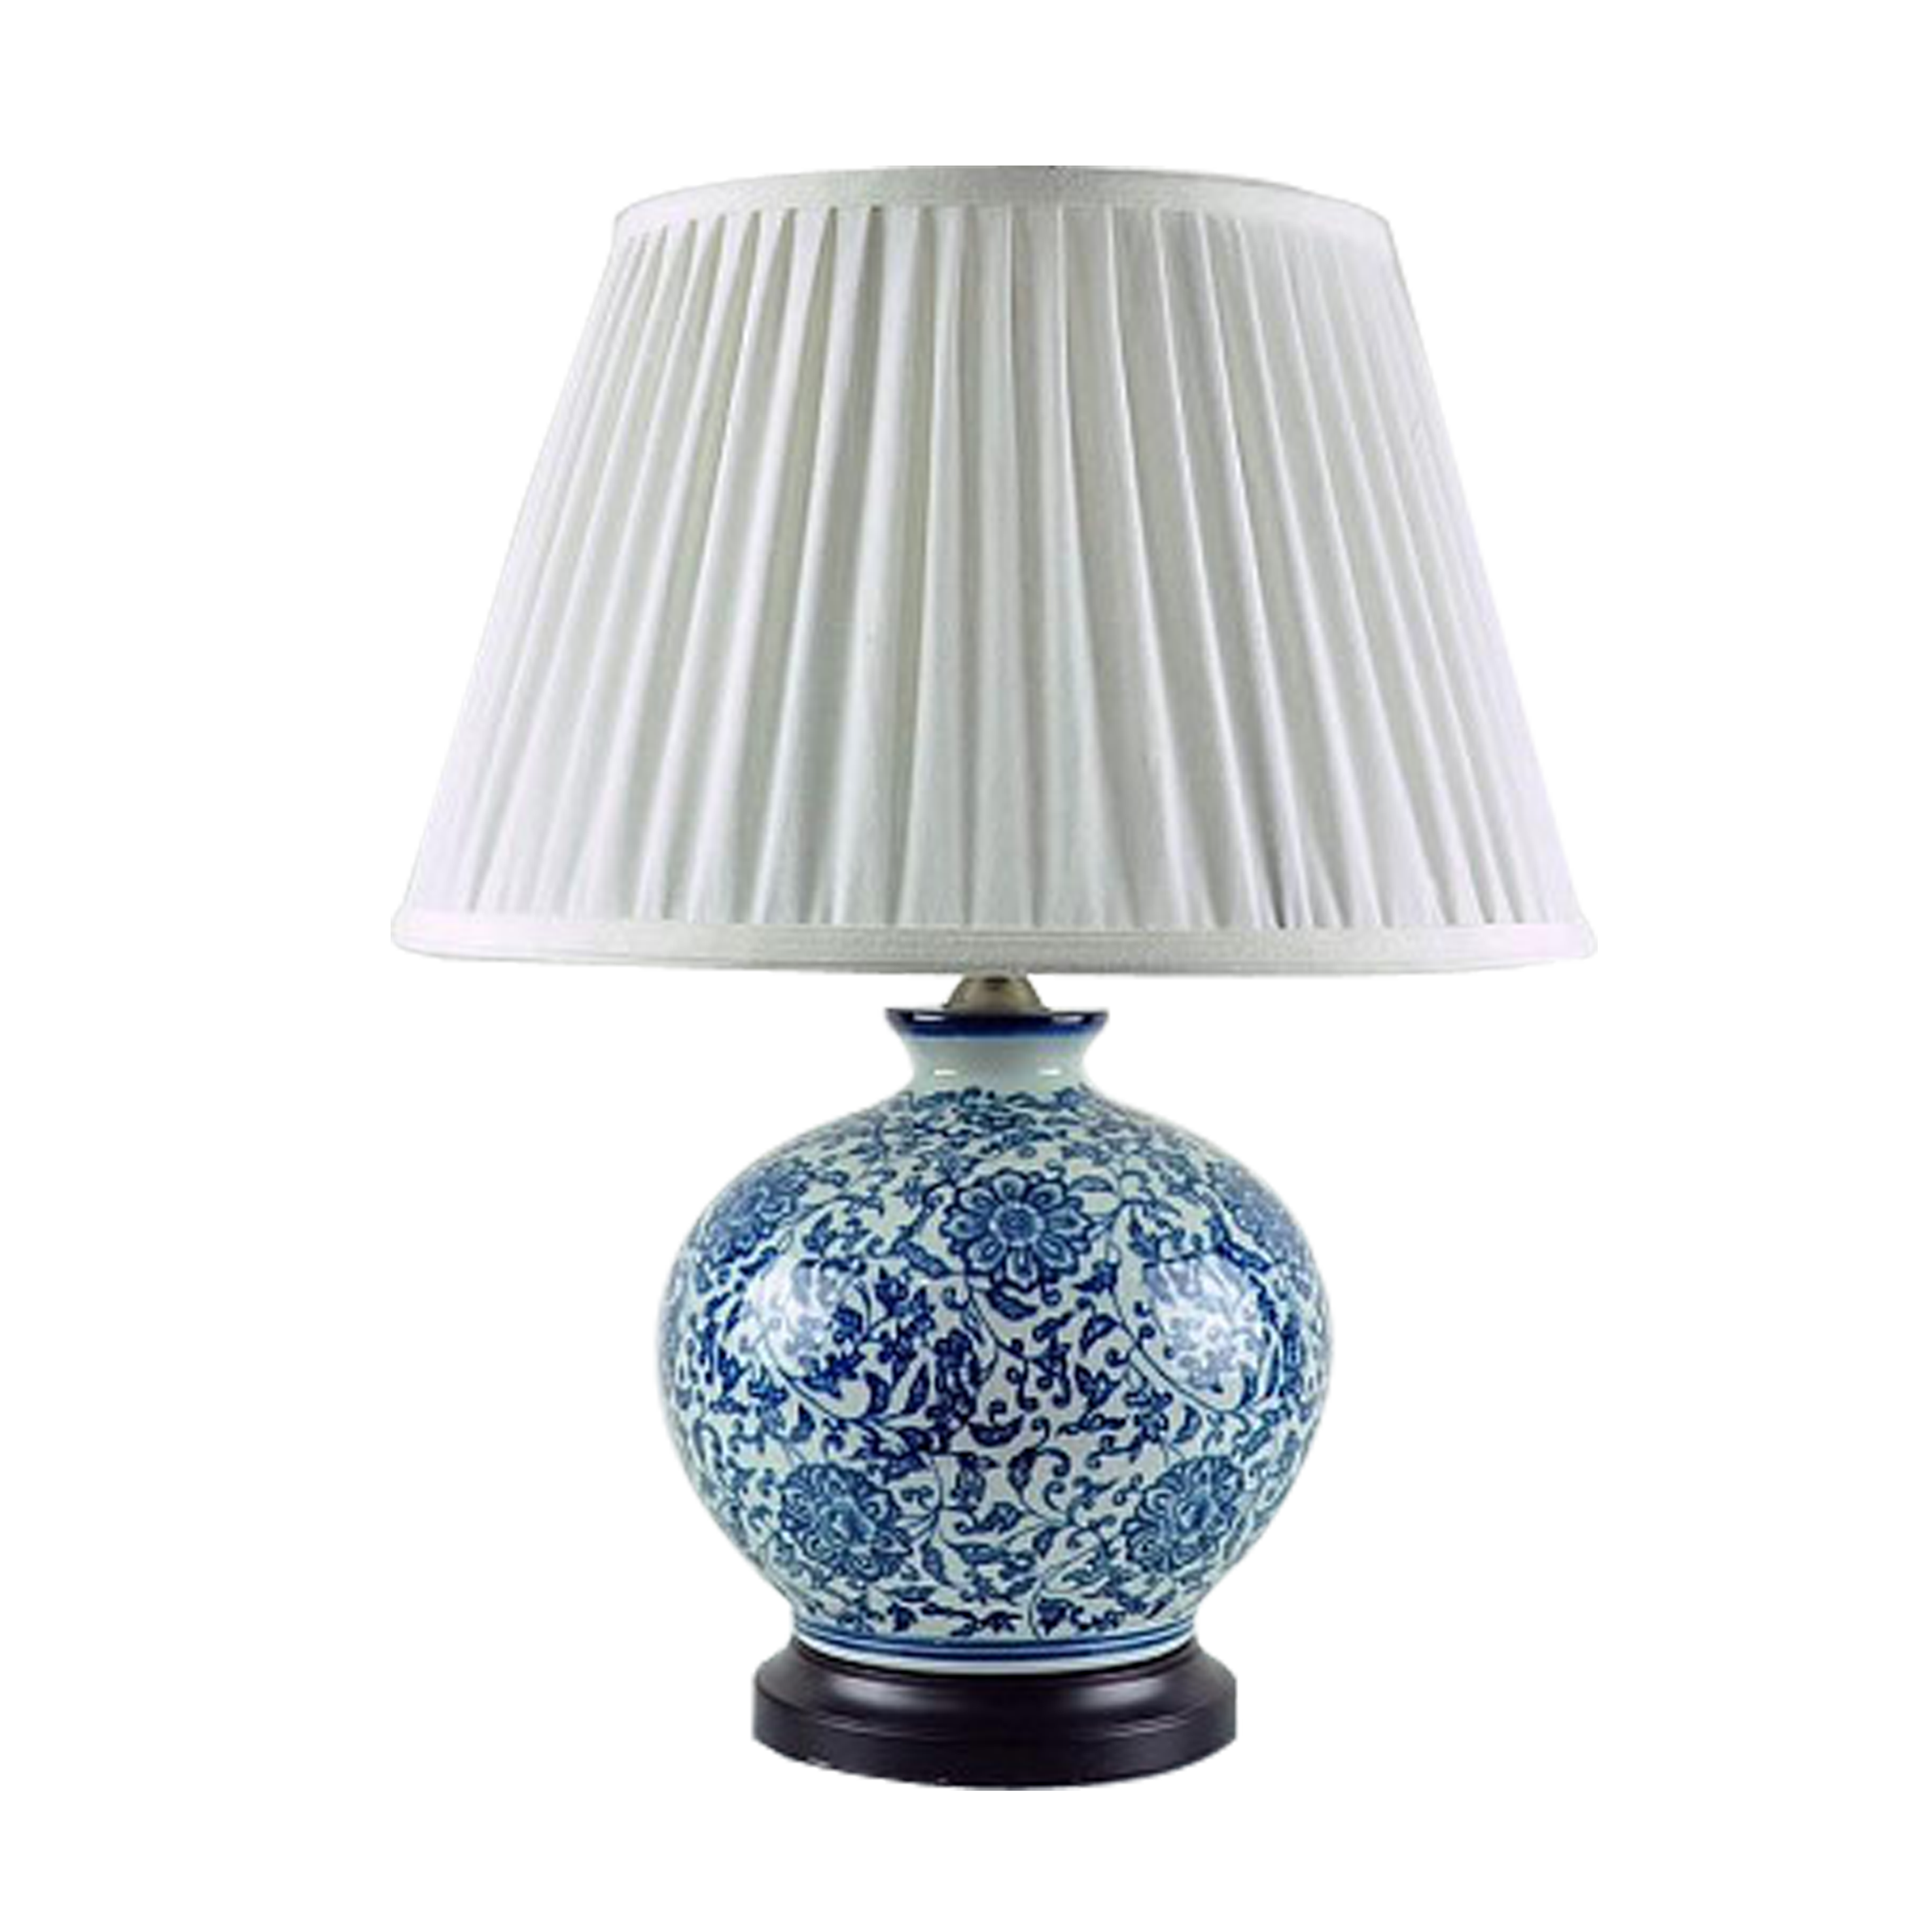 Showcase captivating images of your product categories Ceramic table lamp with fabric shade